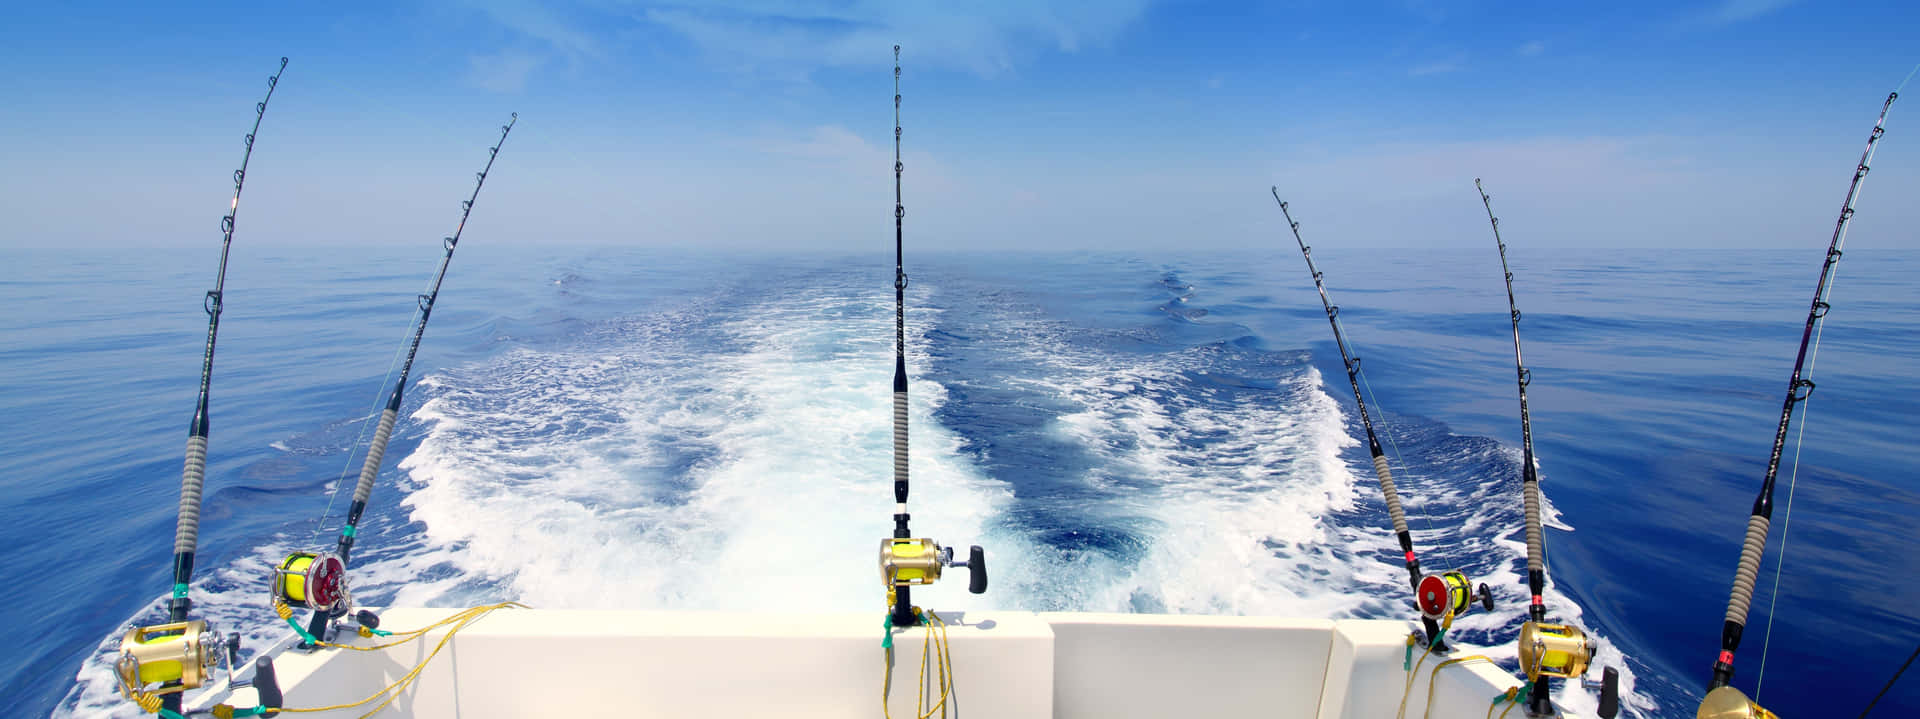 Professional angler casting a fishing rod at the serene lakeside Wallpaper